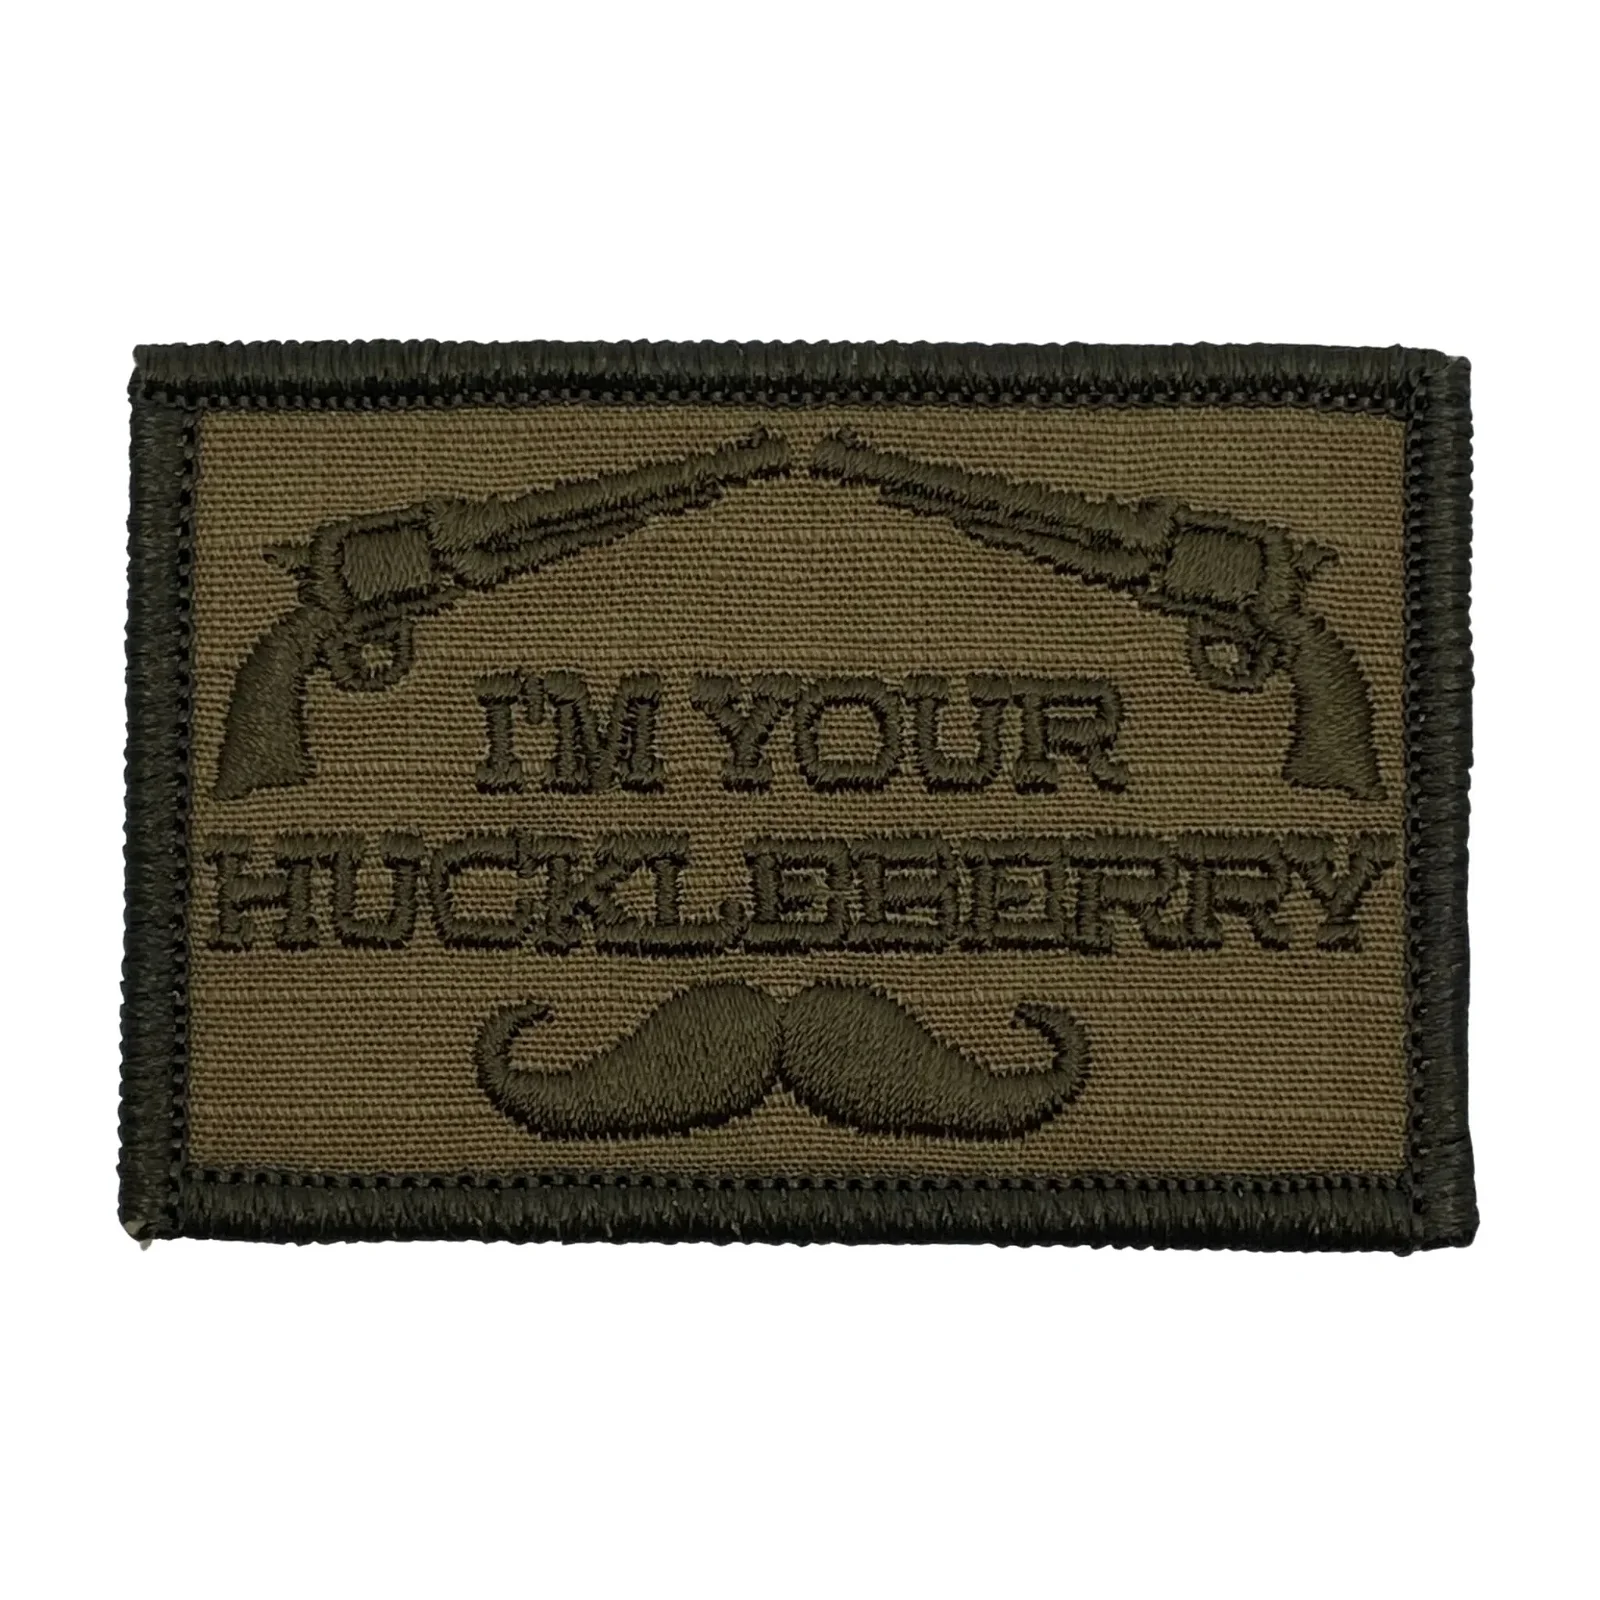 Image of I'm Your Huckleberry Patch - Coyote Brown